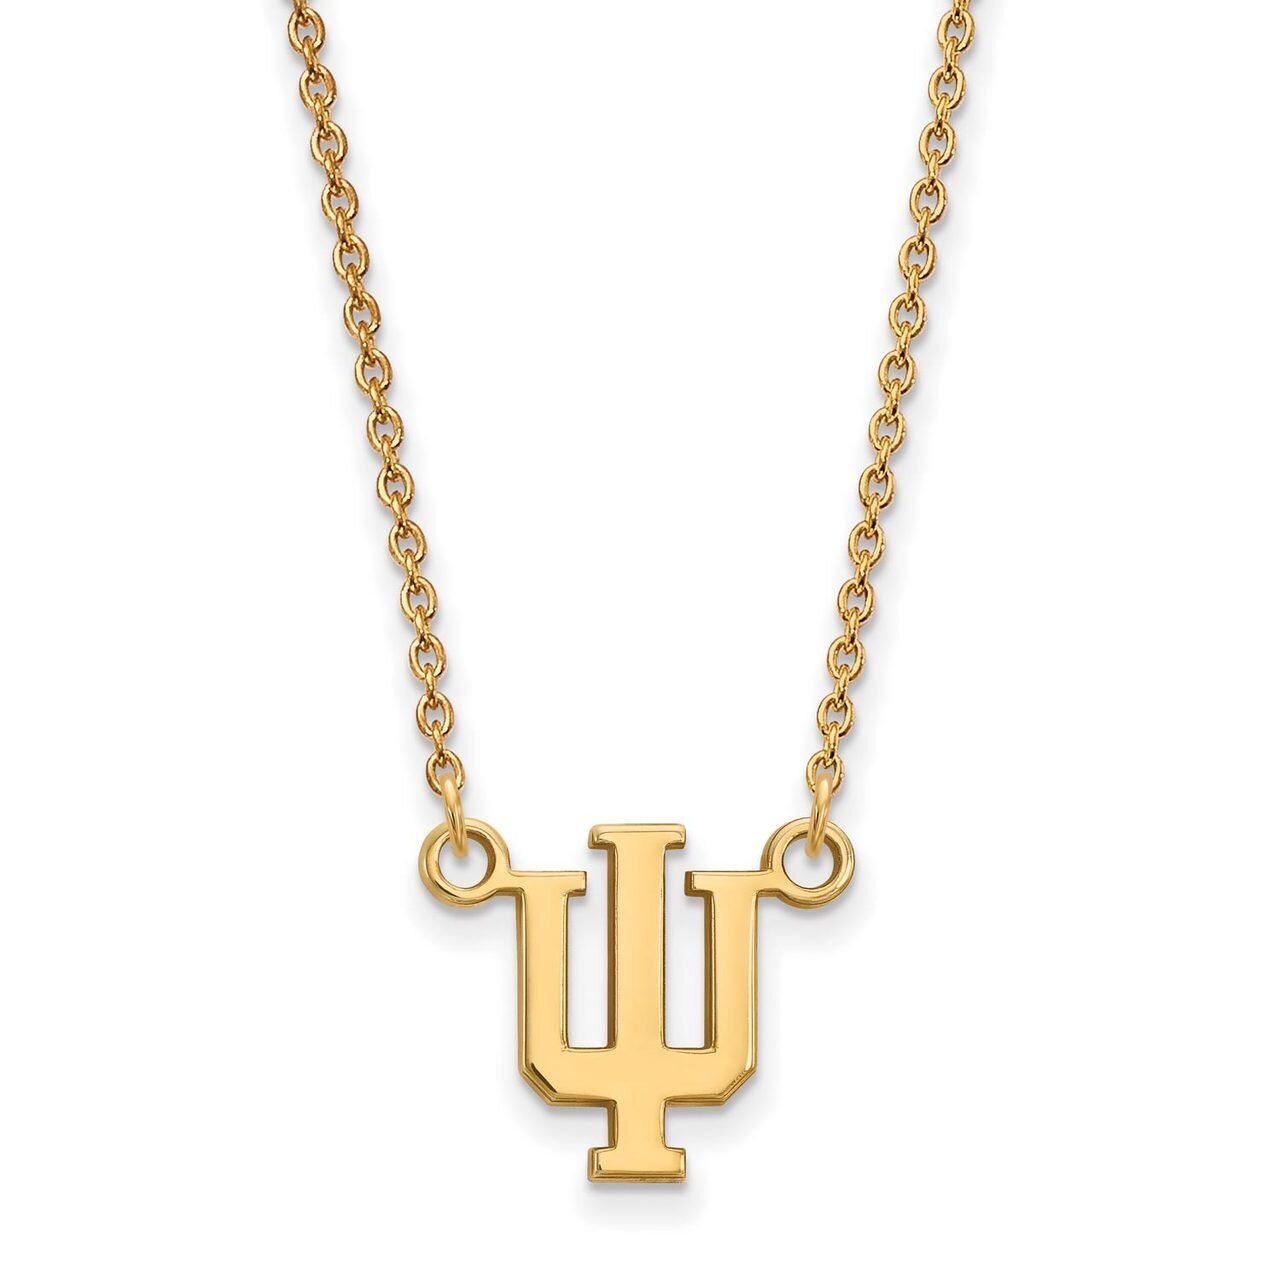 Indiana University Small Pendant with Chain Necklace 10k Yellow Gold 1Y015IU-18